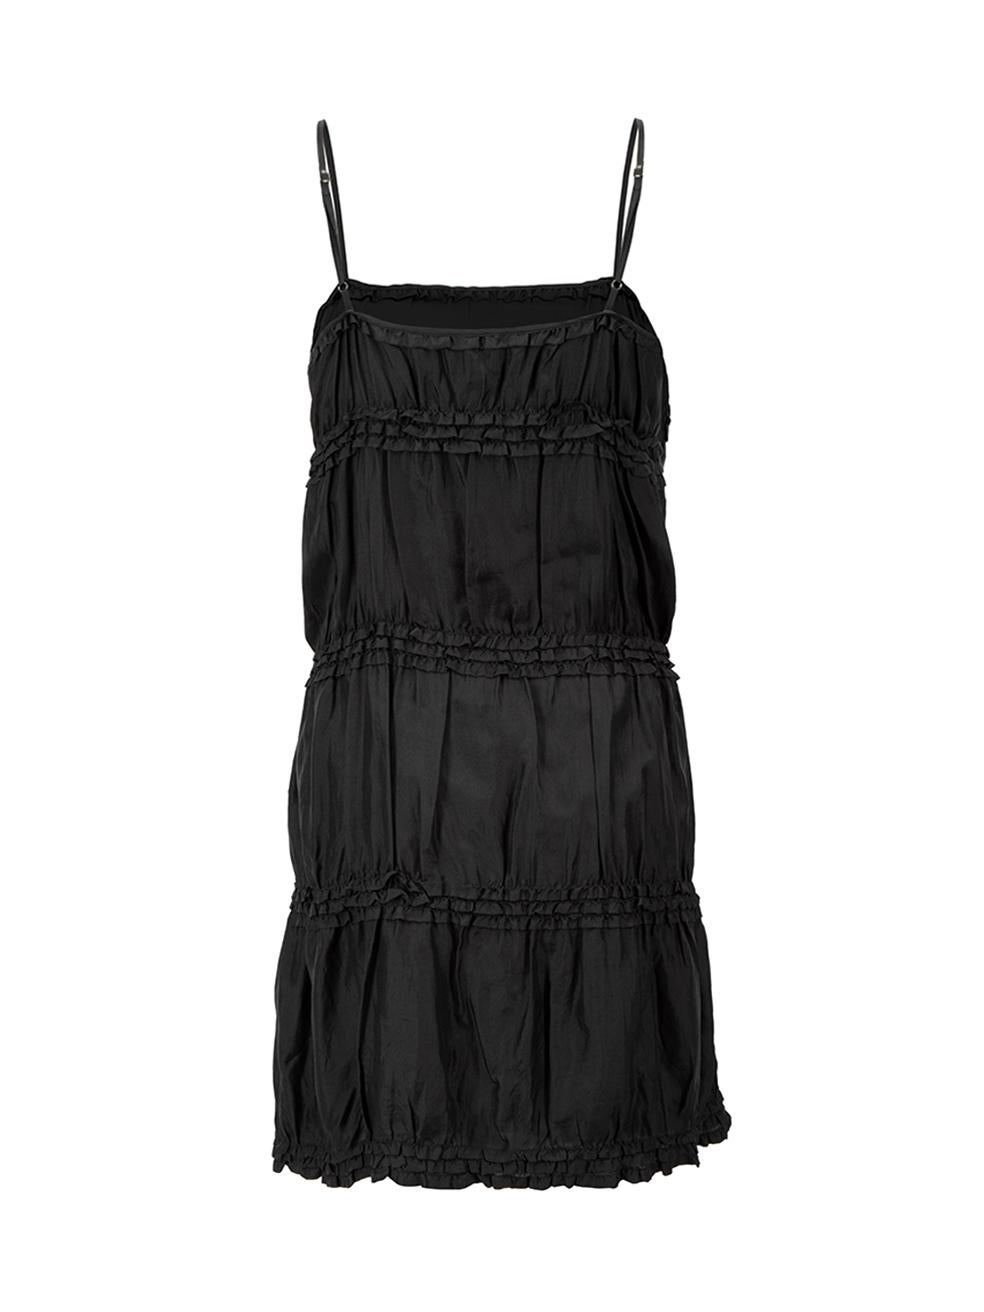 Theory Black Silk Sleeveless Mini Dress Size M In Good Condition For Sale In London, GB